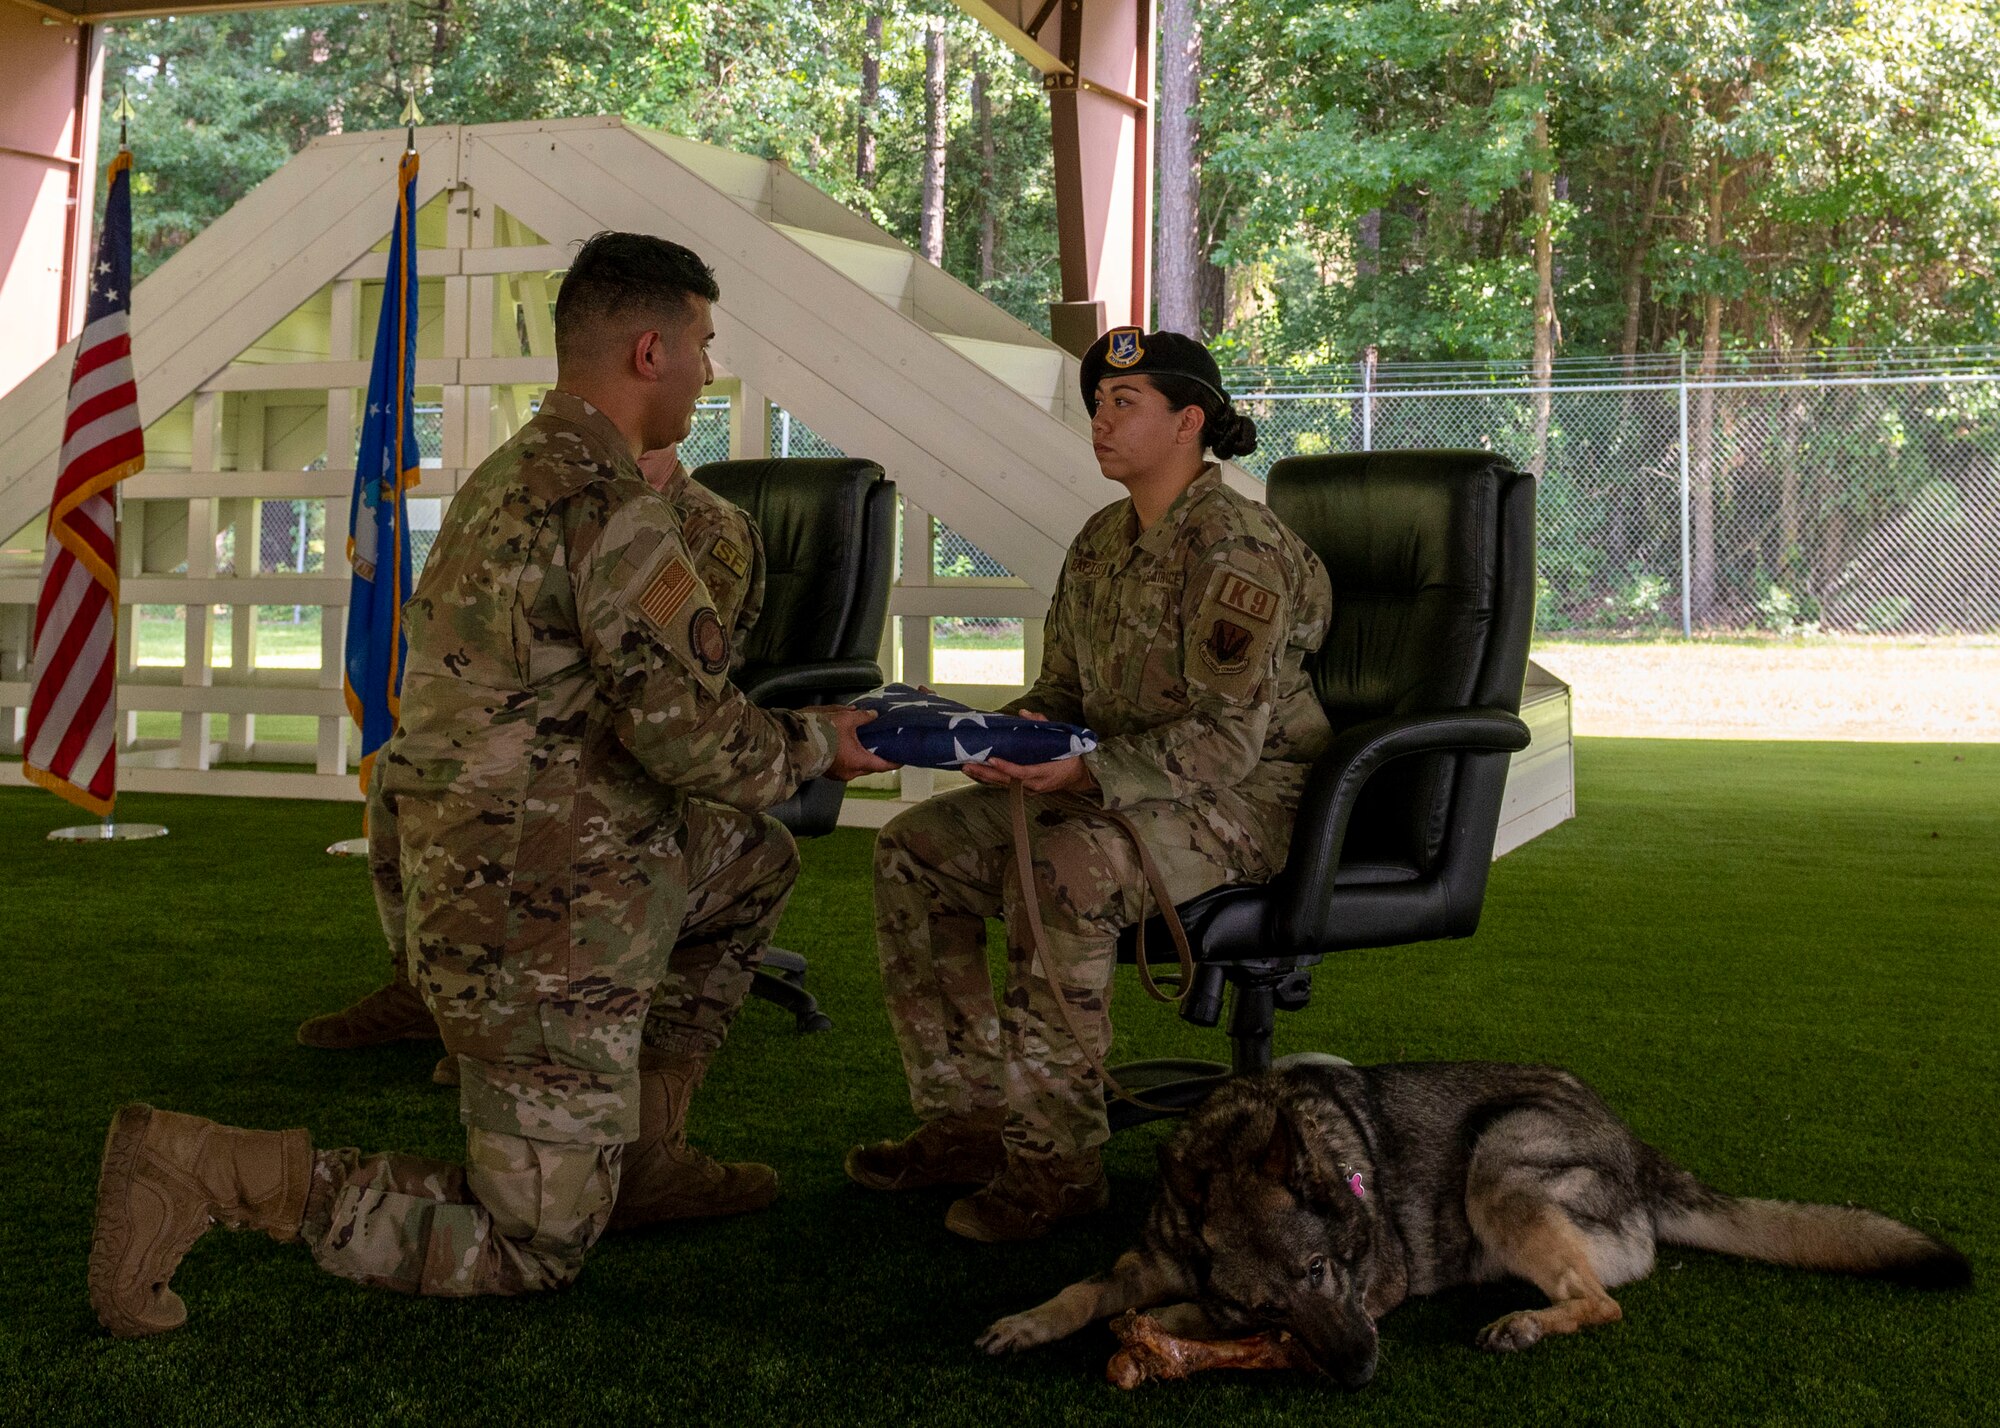 Staff Sgt. Maegan-Ann Baptista, right, 4th Security Forces Squadron military working dog handler, receives a folded American flag from Senior Airman Hector Saenz, 4th Force Support Squadron honor guardsman, during MWD Gina’s retirement ceremony at Seymour Johnson Air Force Base, North Carolina, Aug. 26, 2021.